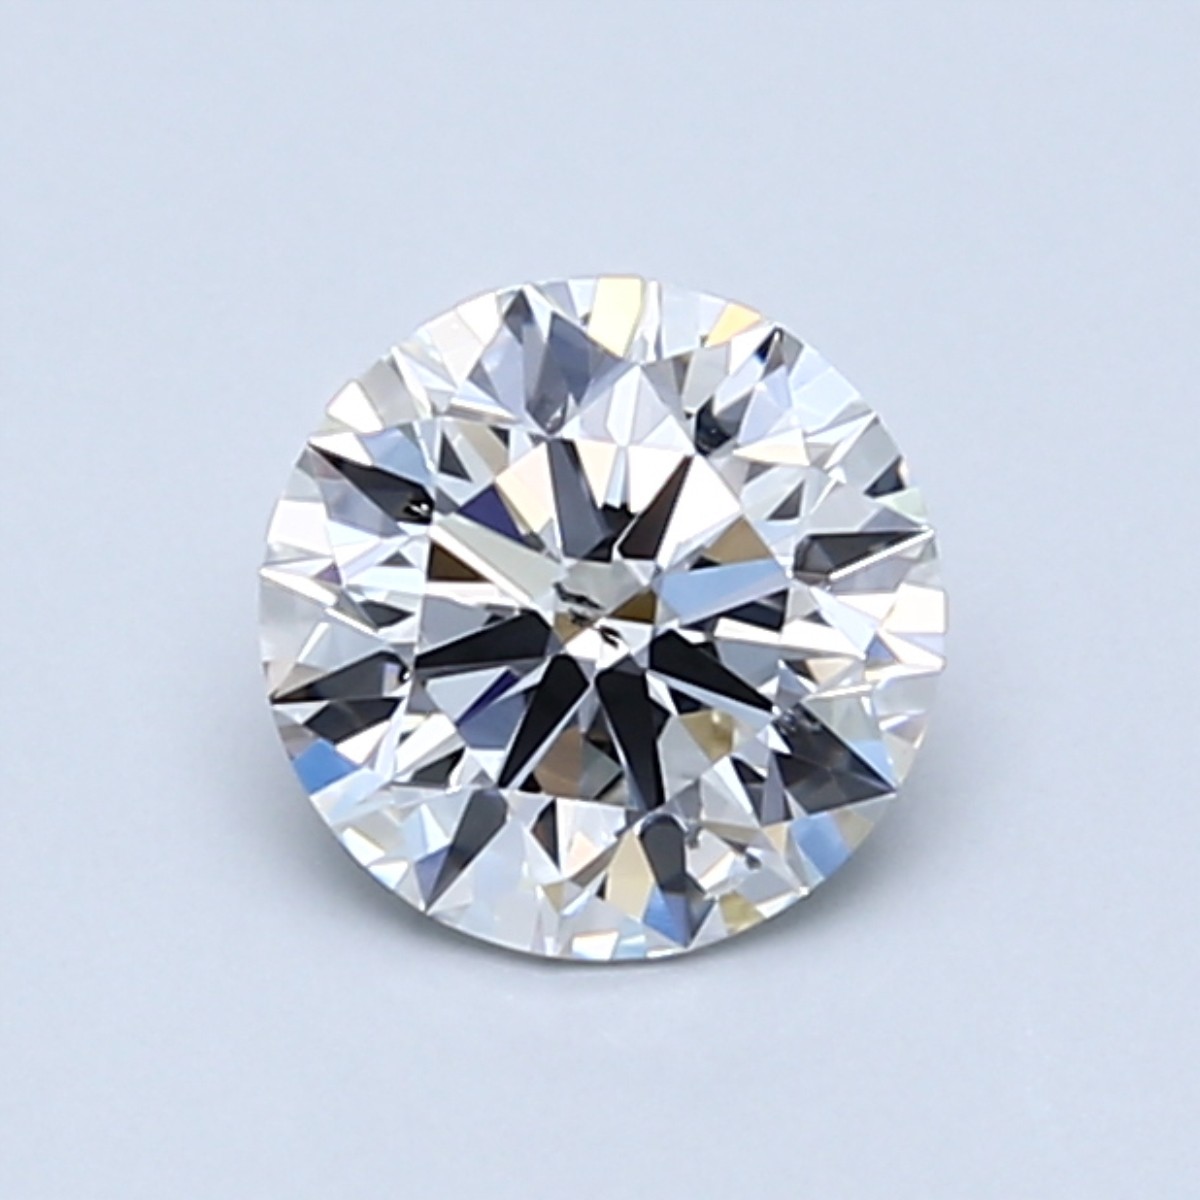 Round 0.9 Carat F Color SI2 Clarity For Sale